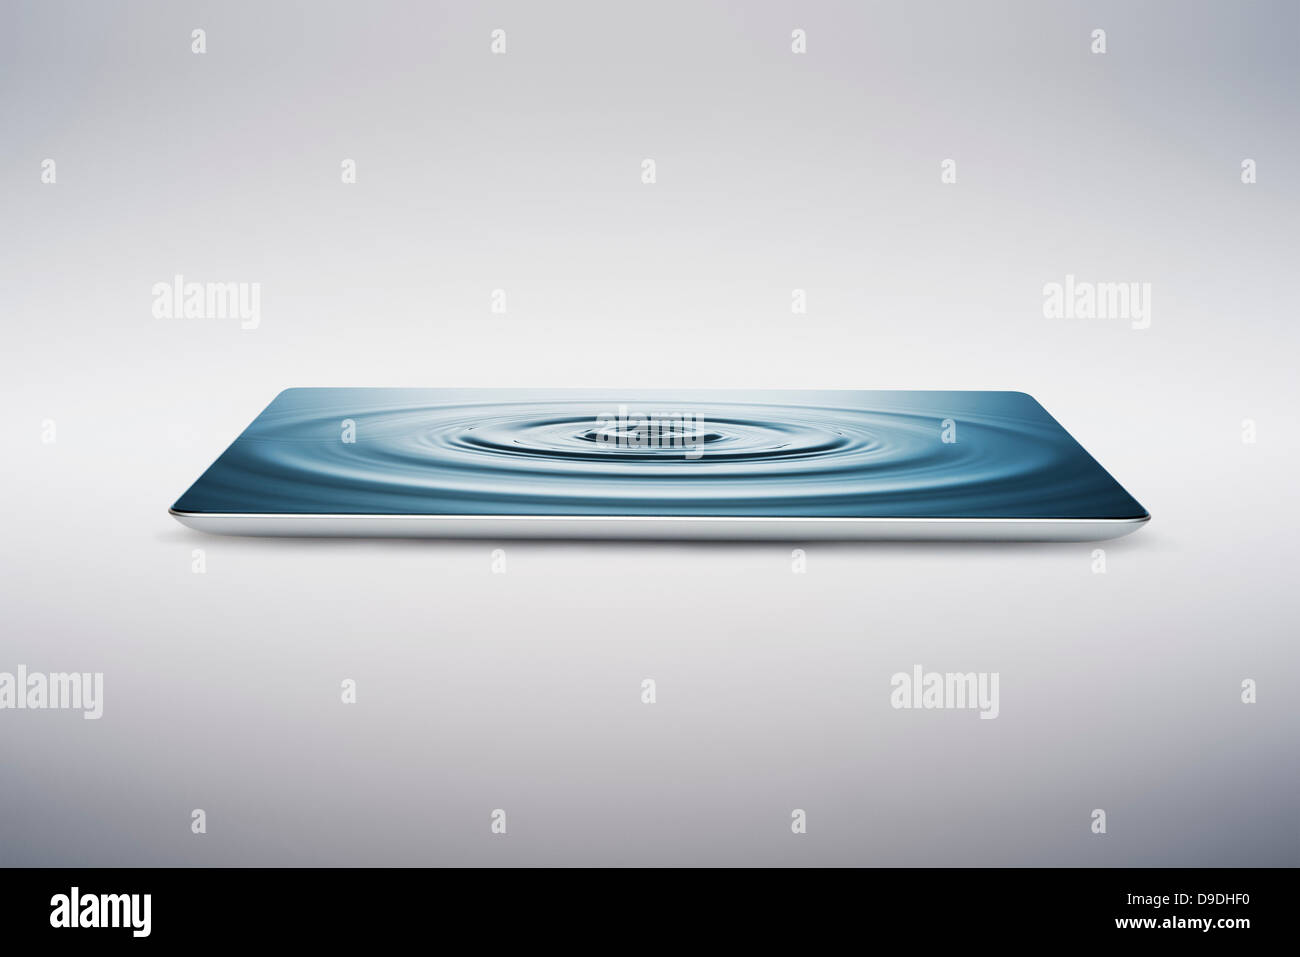 Digital tablet with water ripple on screen Stock Photo